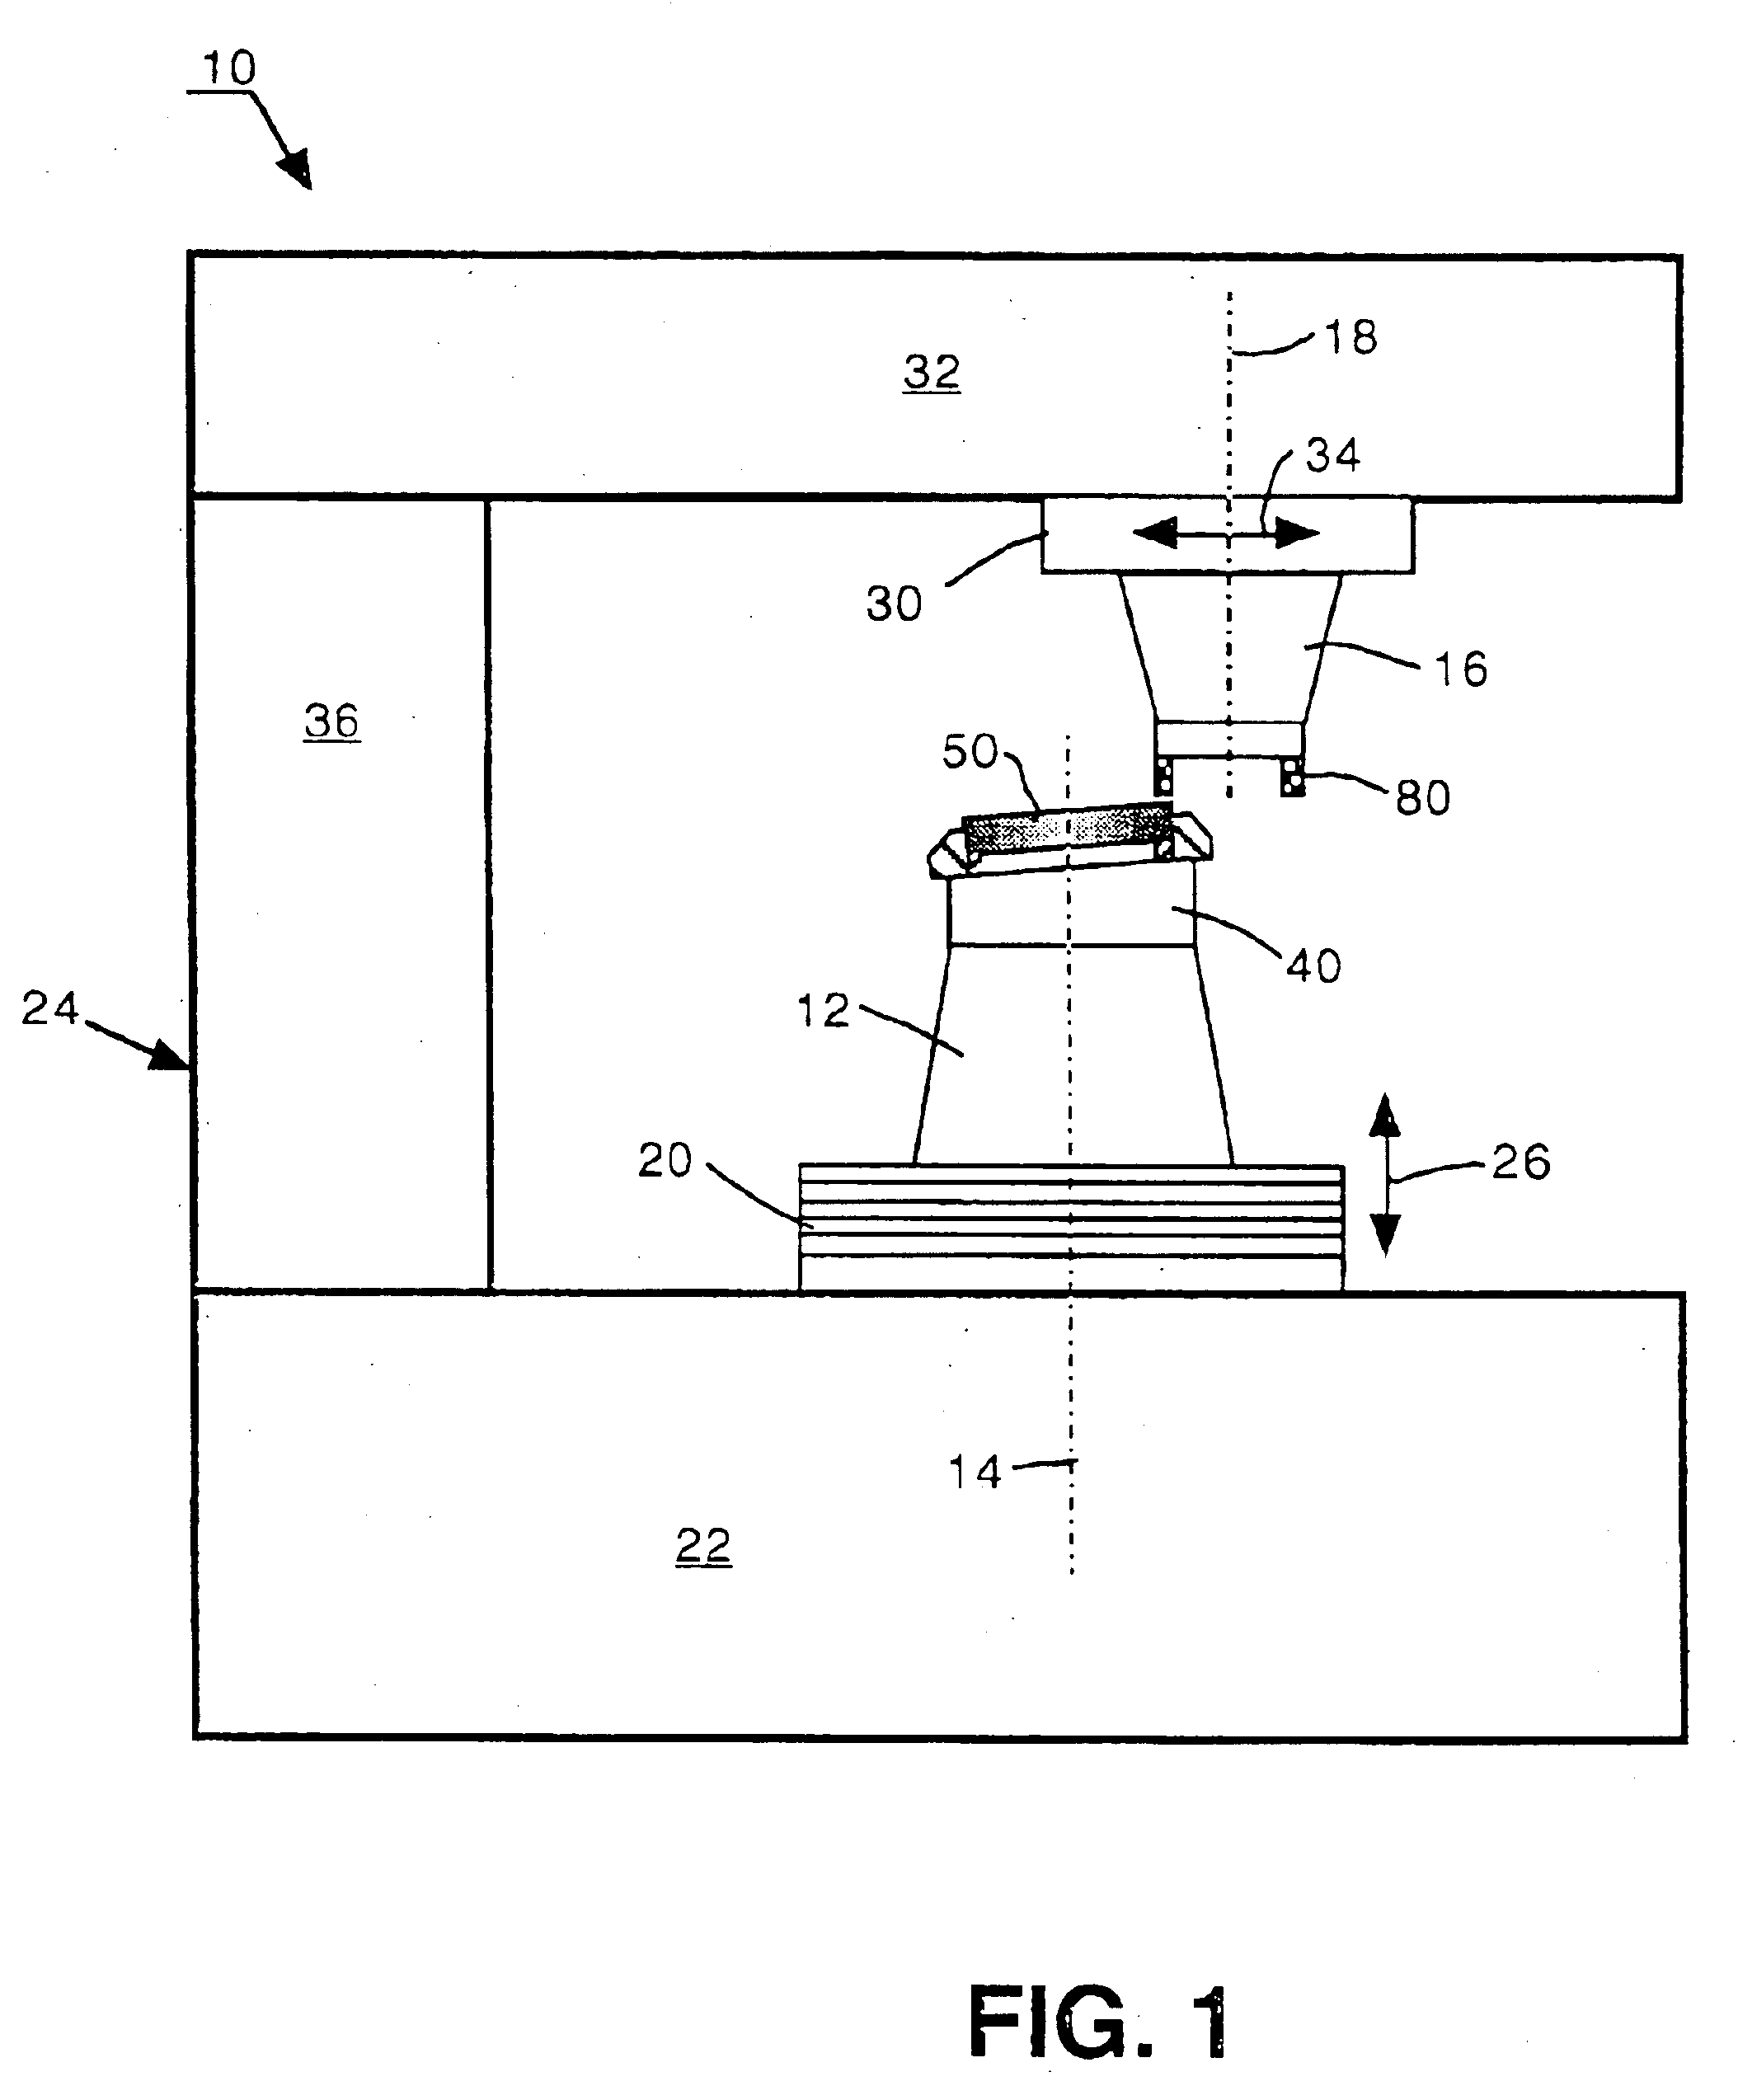 Part-holding fixture for grinding wedged optical flats